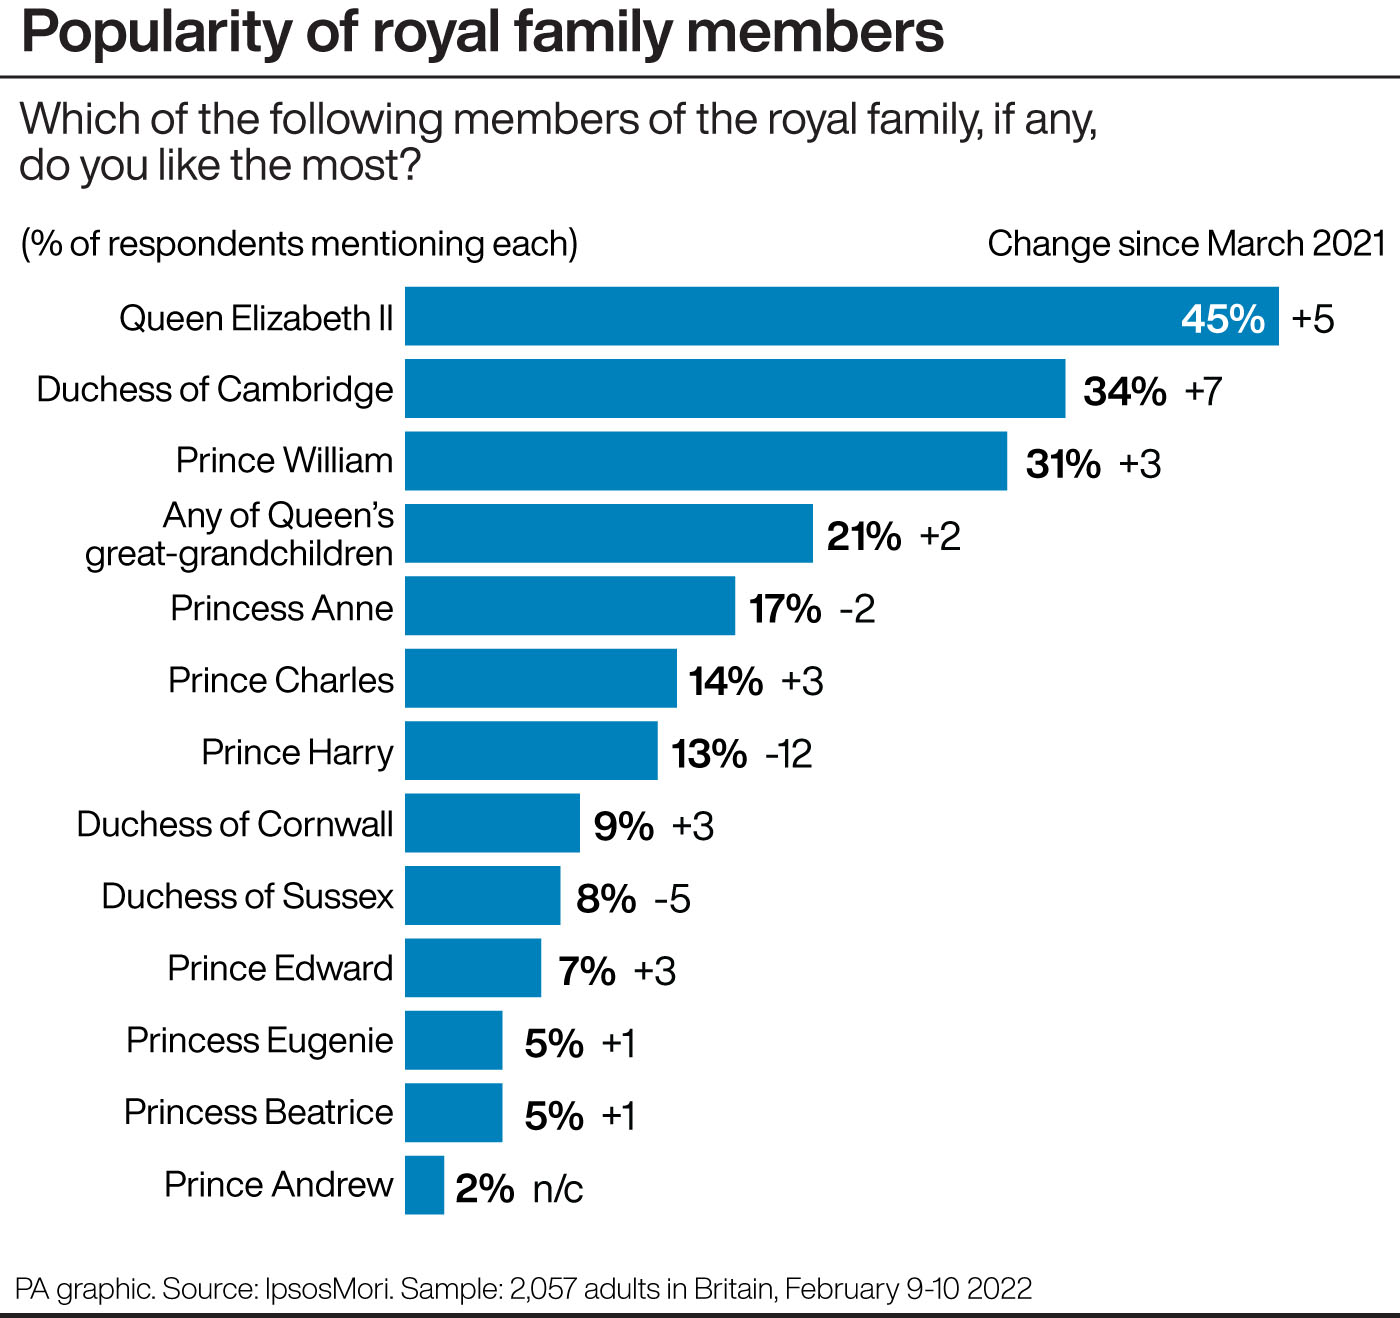 PA infographic showing popularity of royal family members